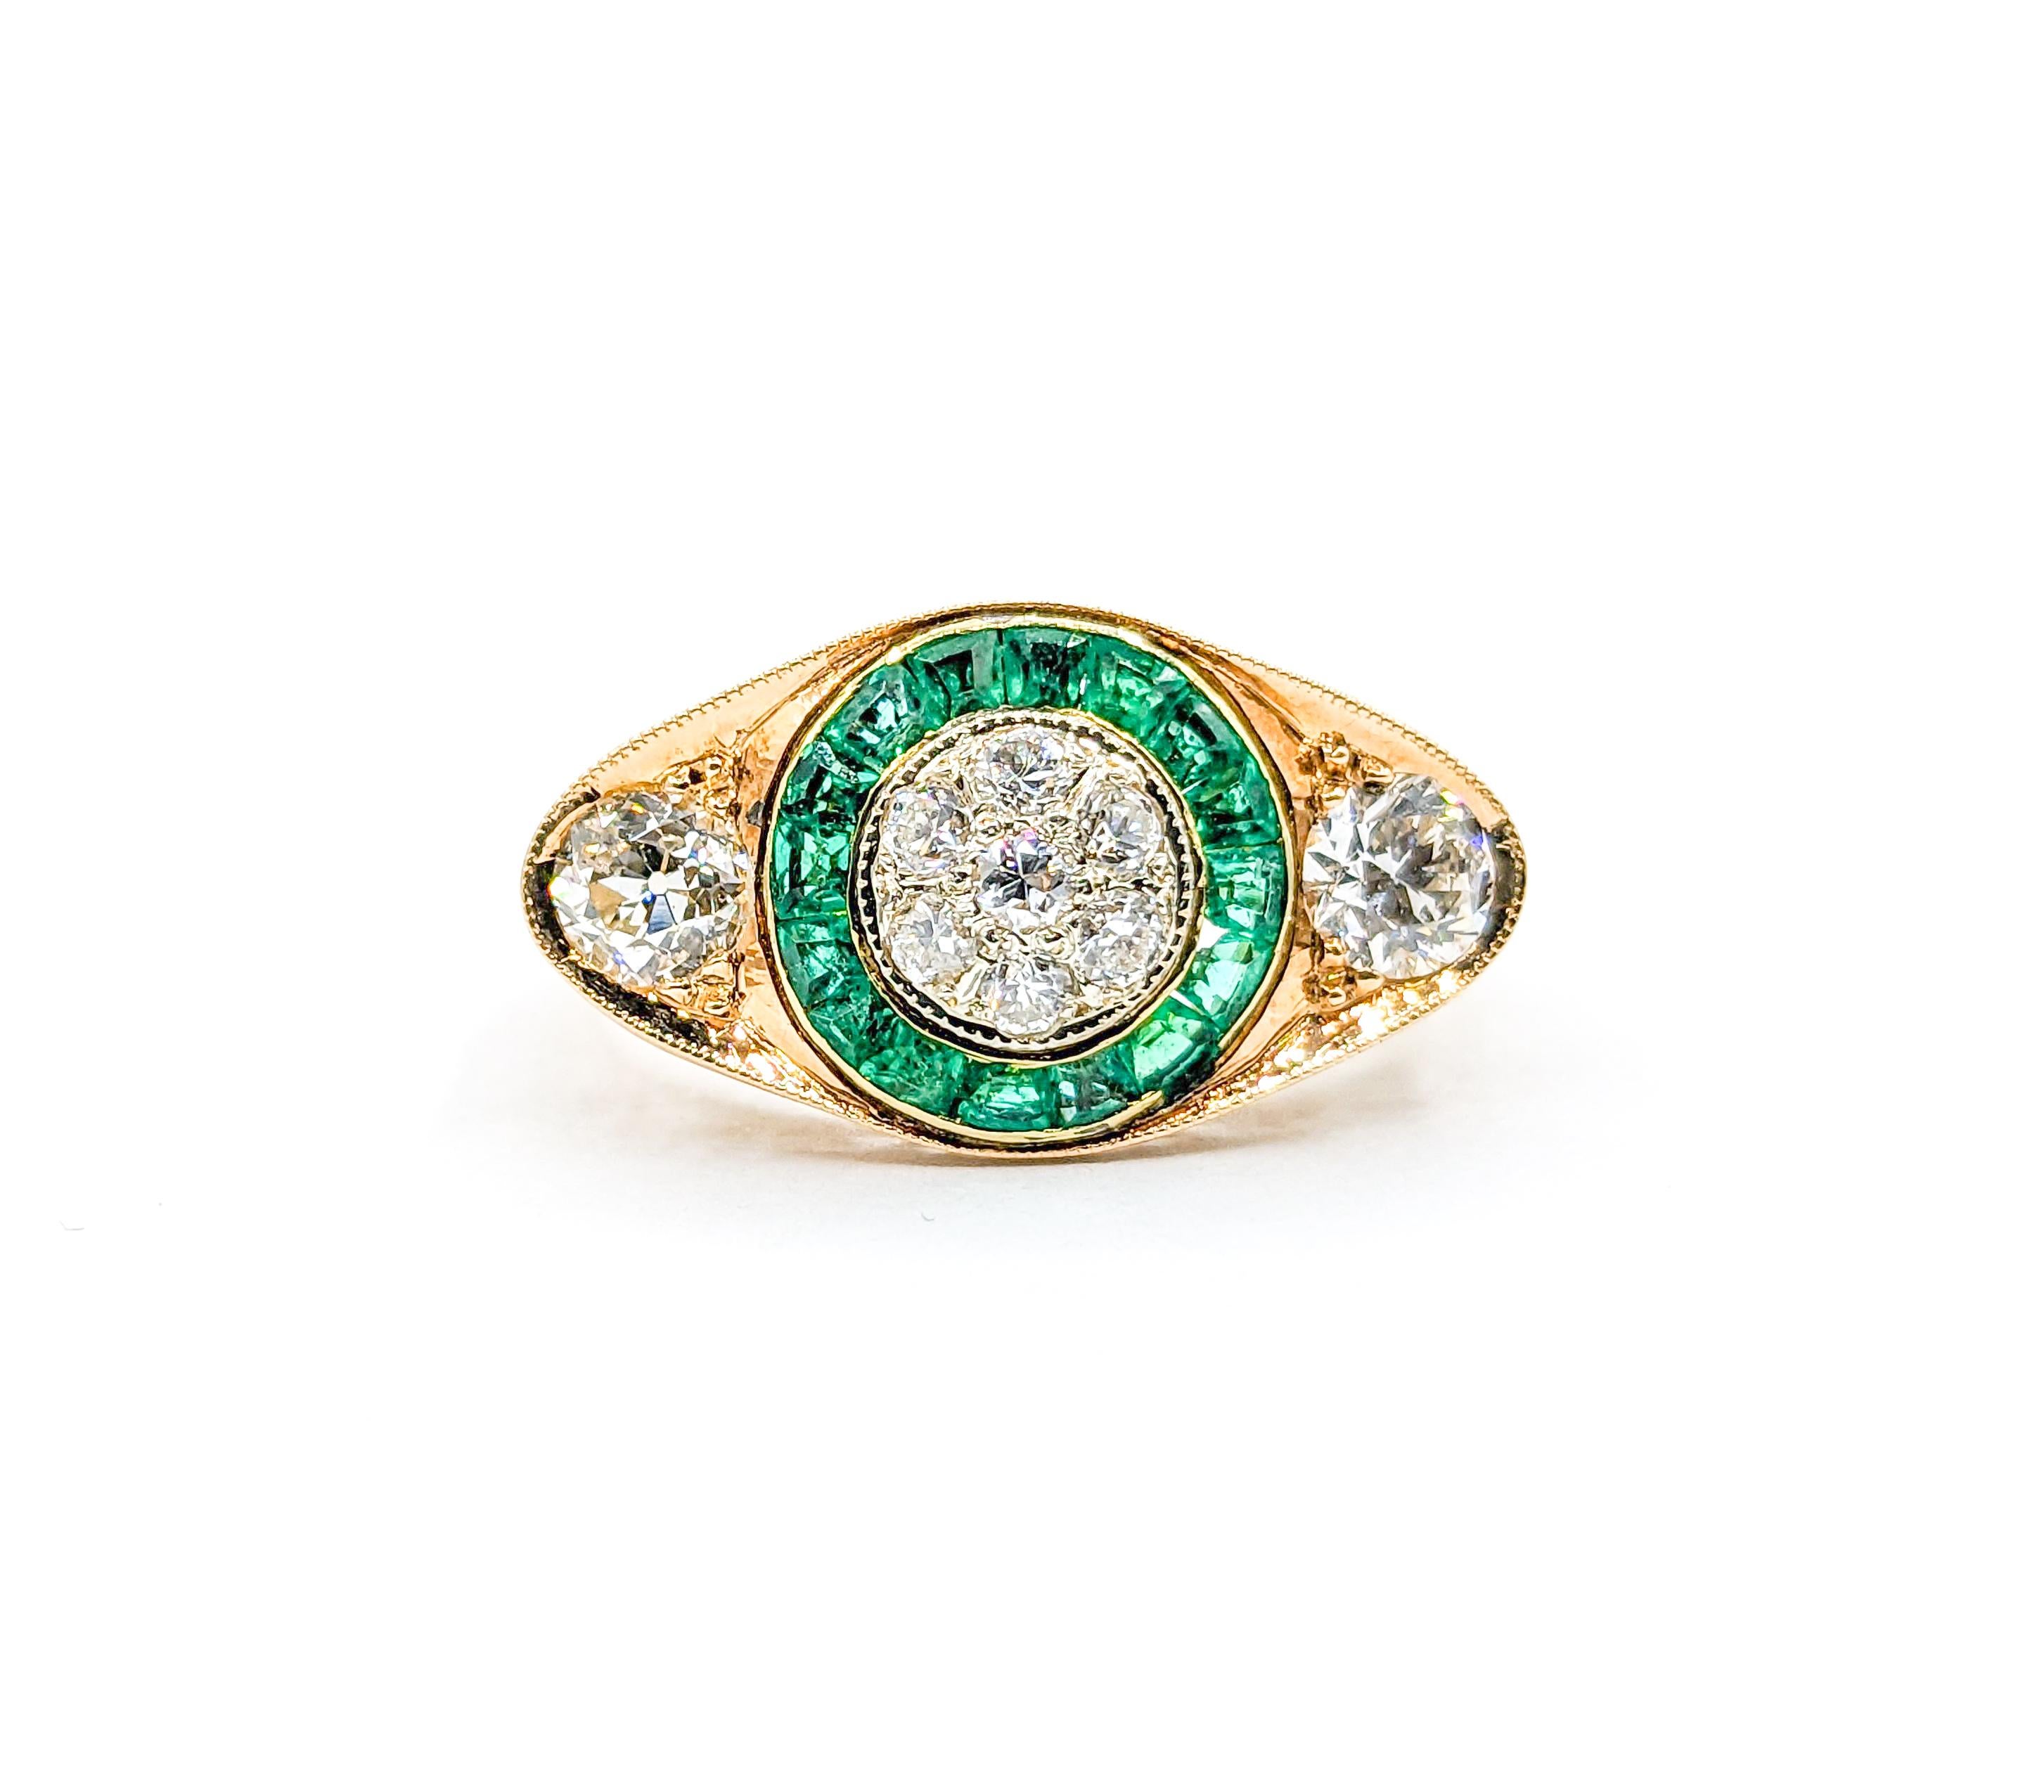 Antique Old European Diamond & Emeralds Target Ring in 14K Gold For Sale 6